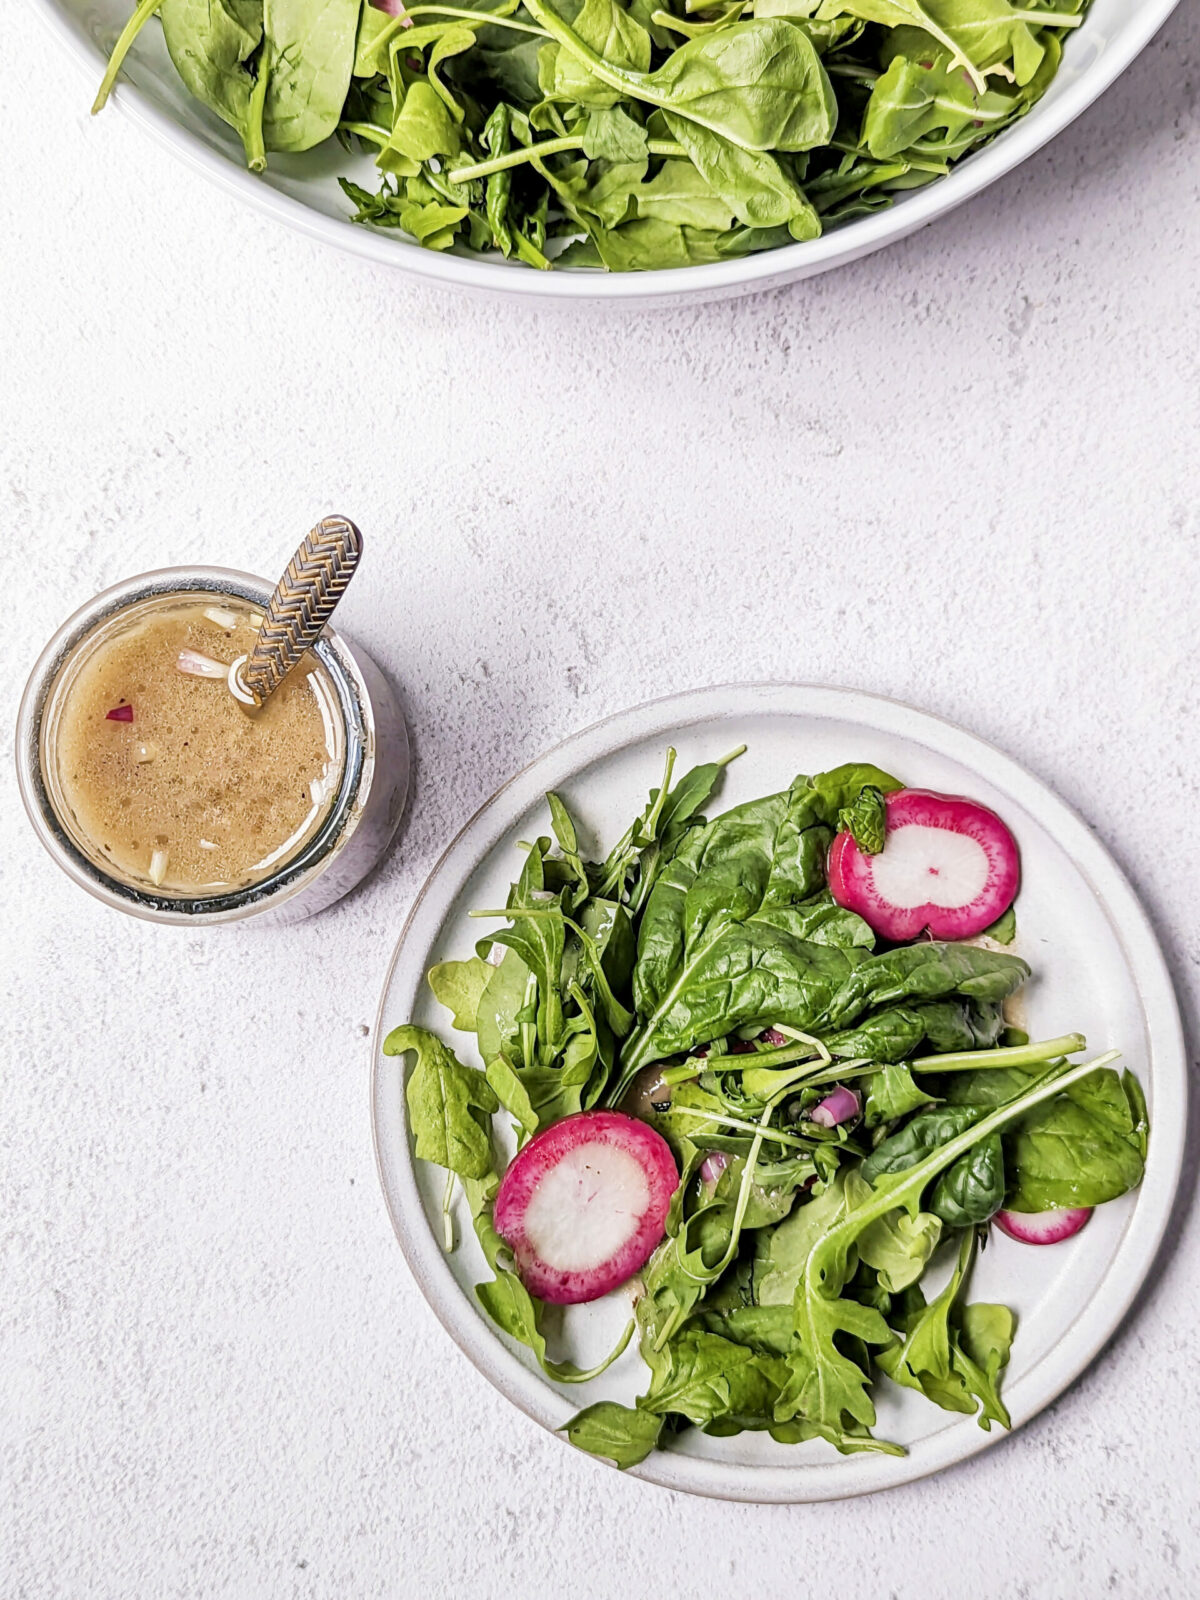 A small plate of Arugula and Spinach Salad with a side of sherry shallot dressing, and a serving bowl of the salad in the background.